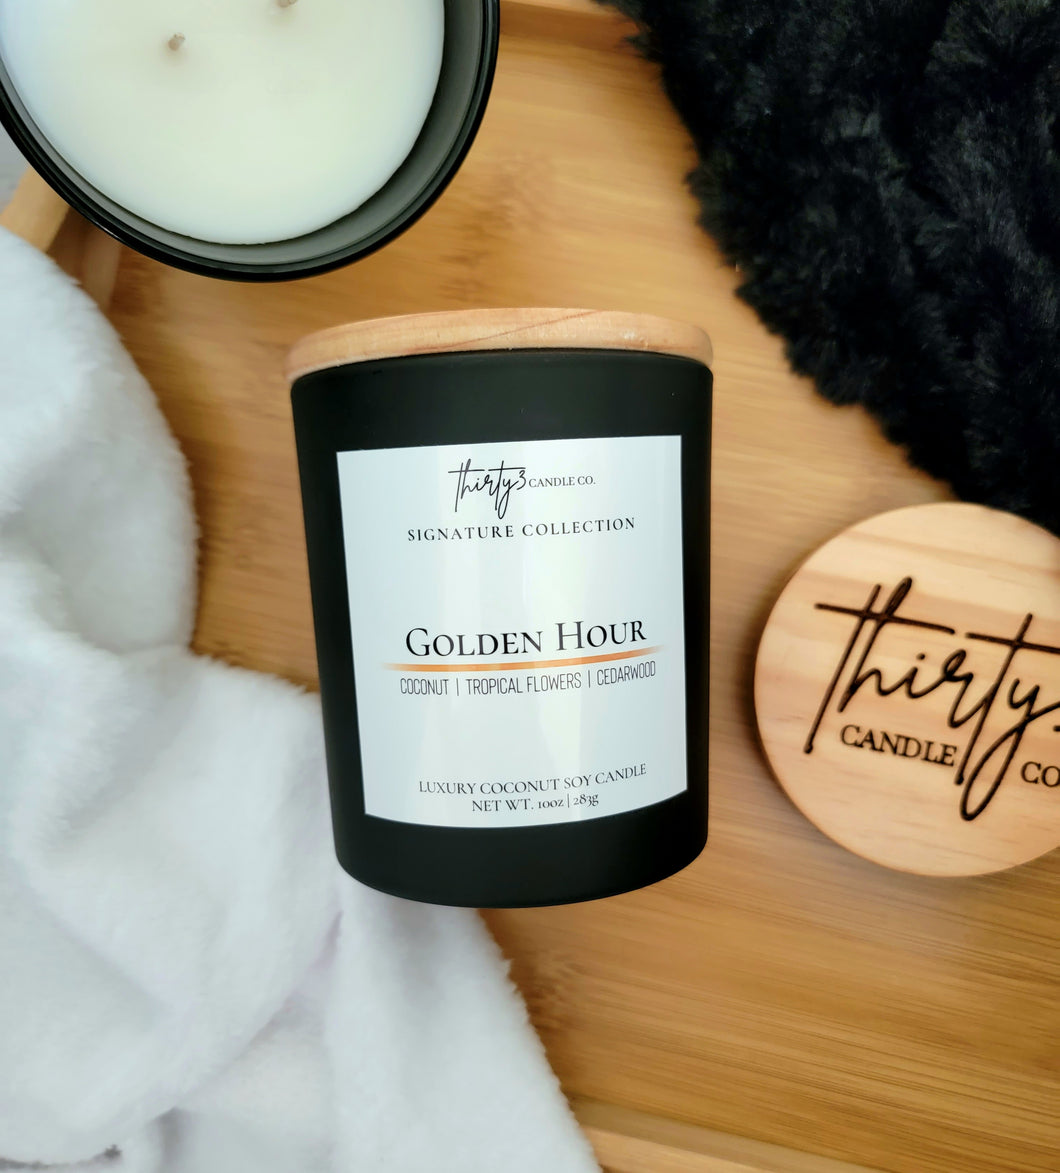 GOLDEN HOUR Candle - Coconut | Tropical Flowers | Cedarwood